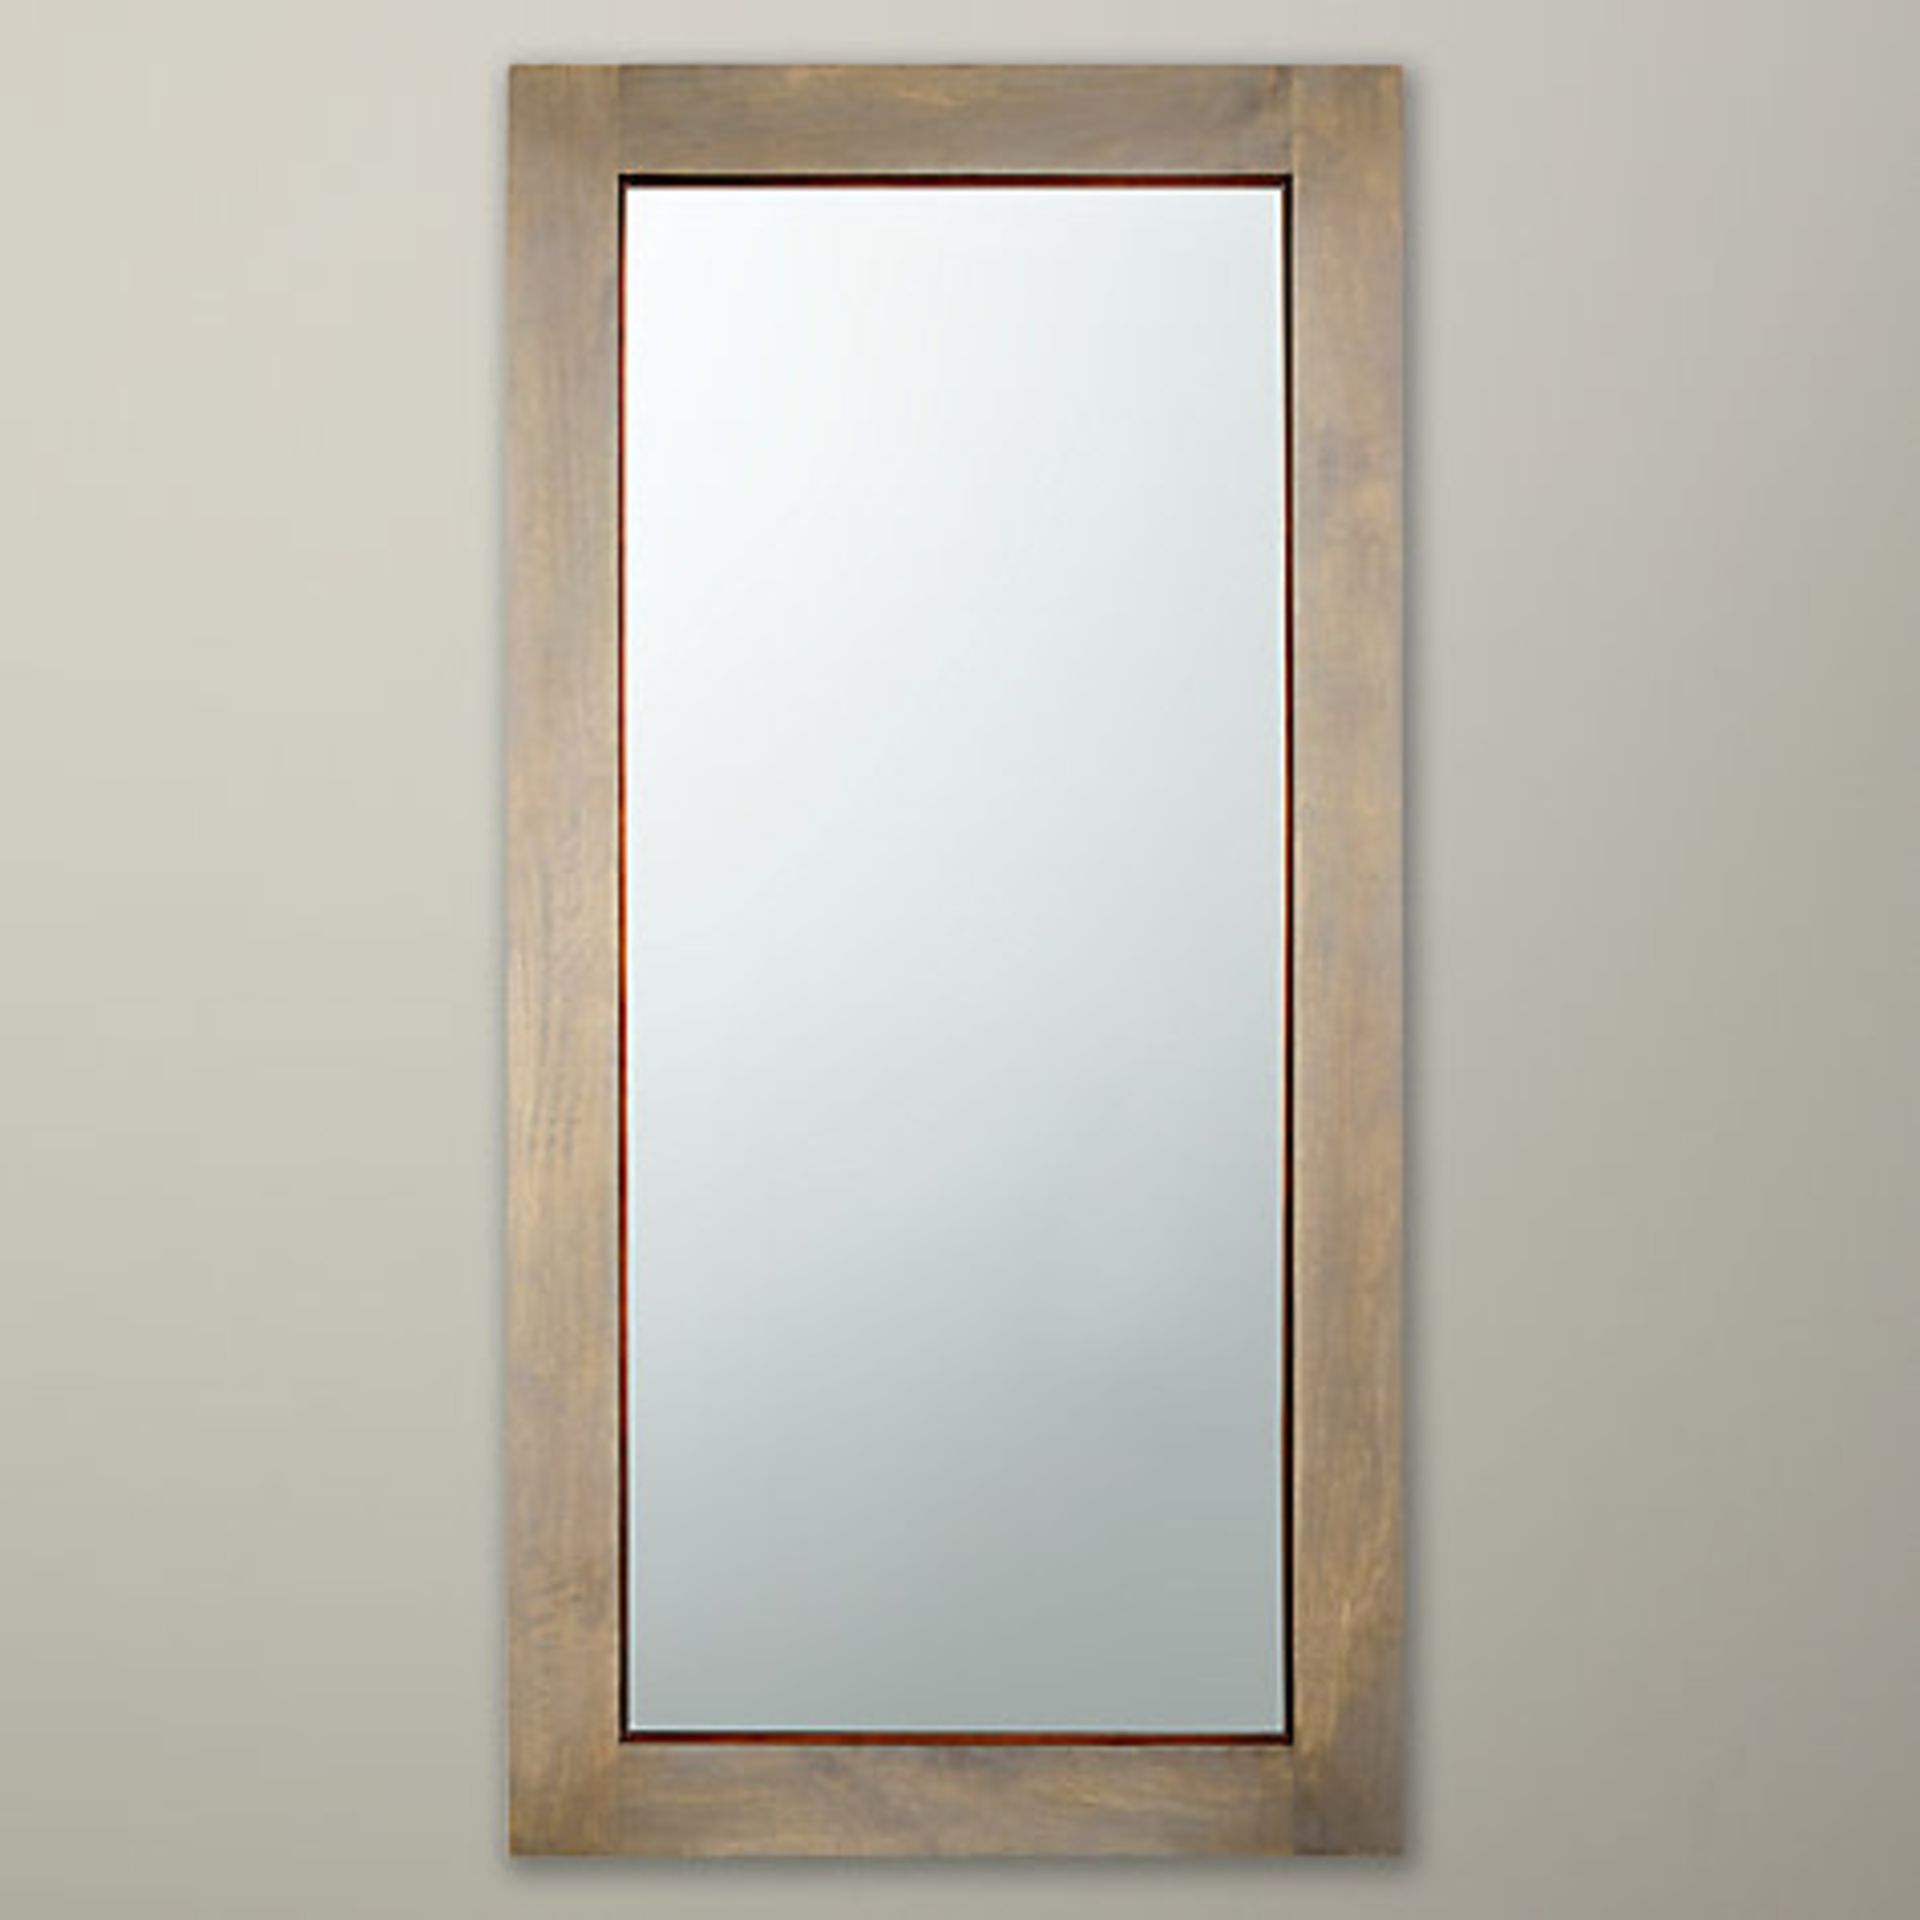 1 x BOXED ASHA WALL MIRROR IN GREY RRP £250 (22.5.17)(4014) *PLEASE NOTE THAT THE BID PRICE IS